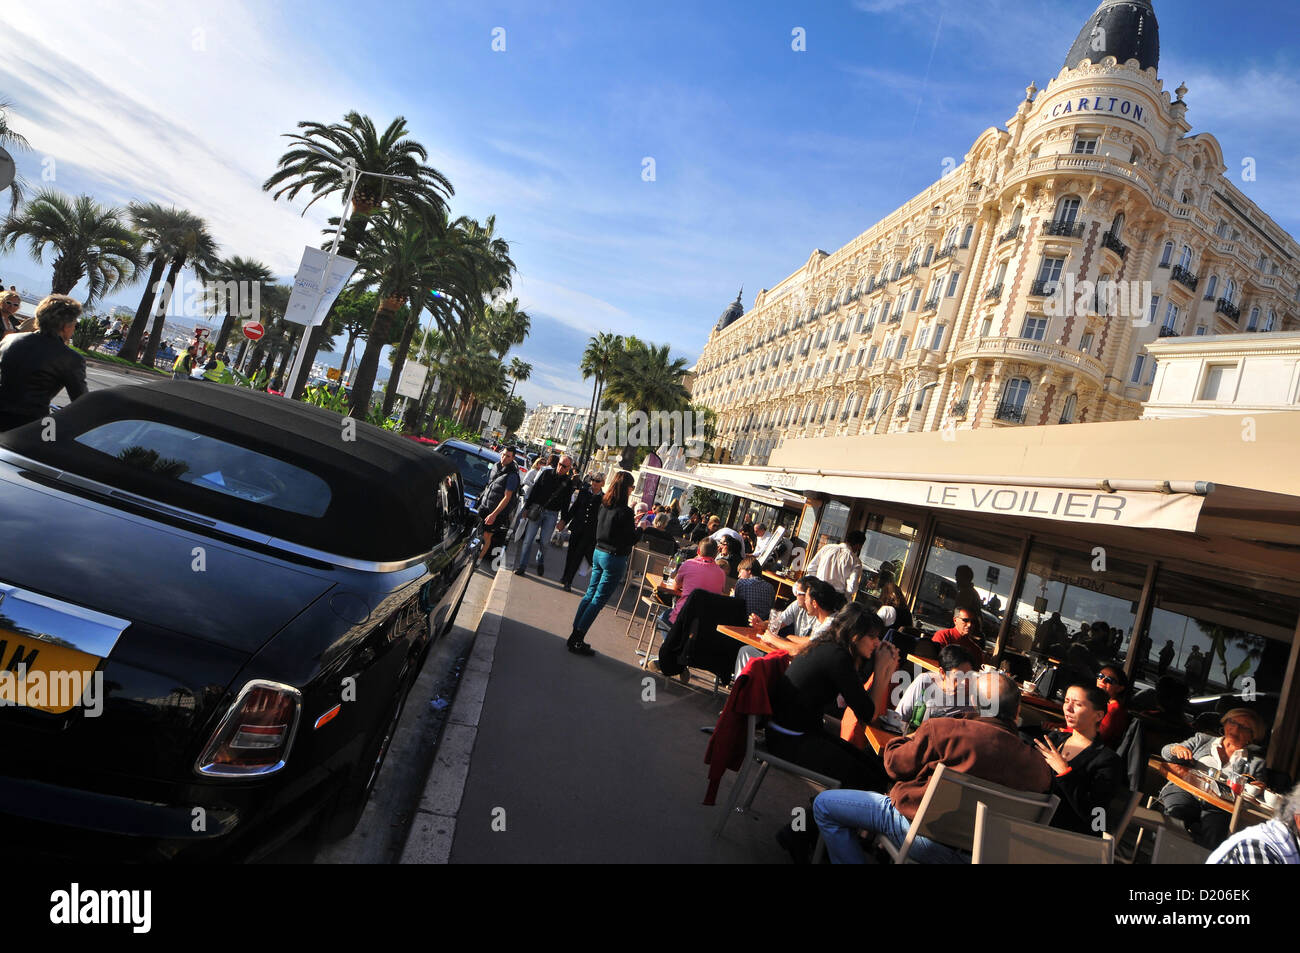 People in cafes on the Croisette, Cannes, Cote d'Azur, South France, Europe Stock Photo